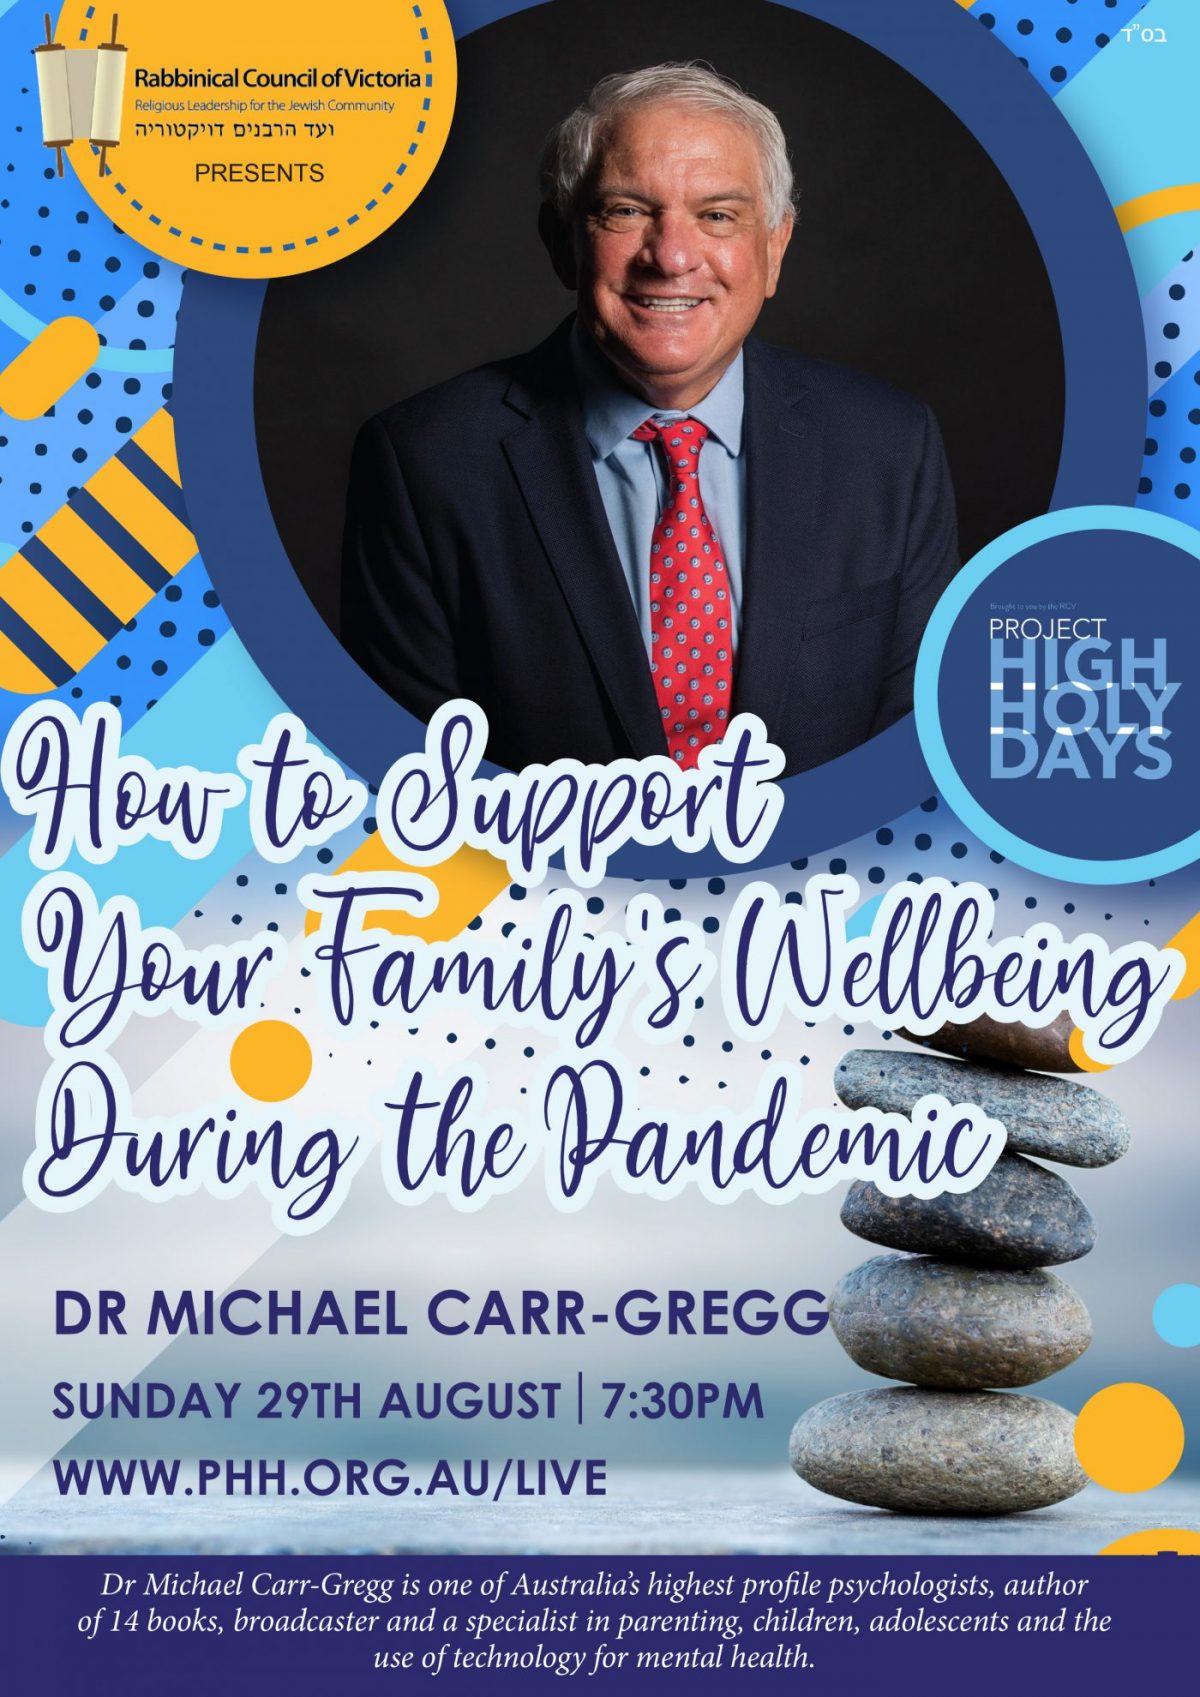 Dr Michael Carr-Gregg Wellbeing